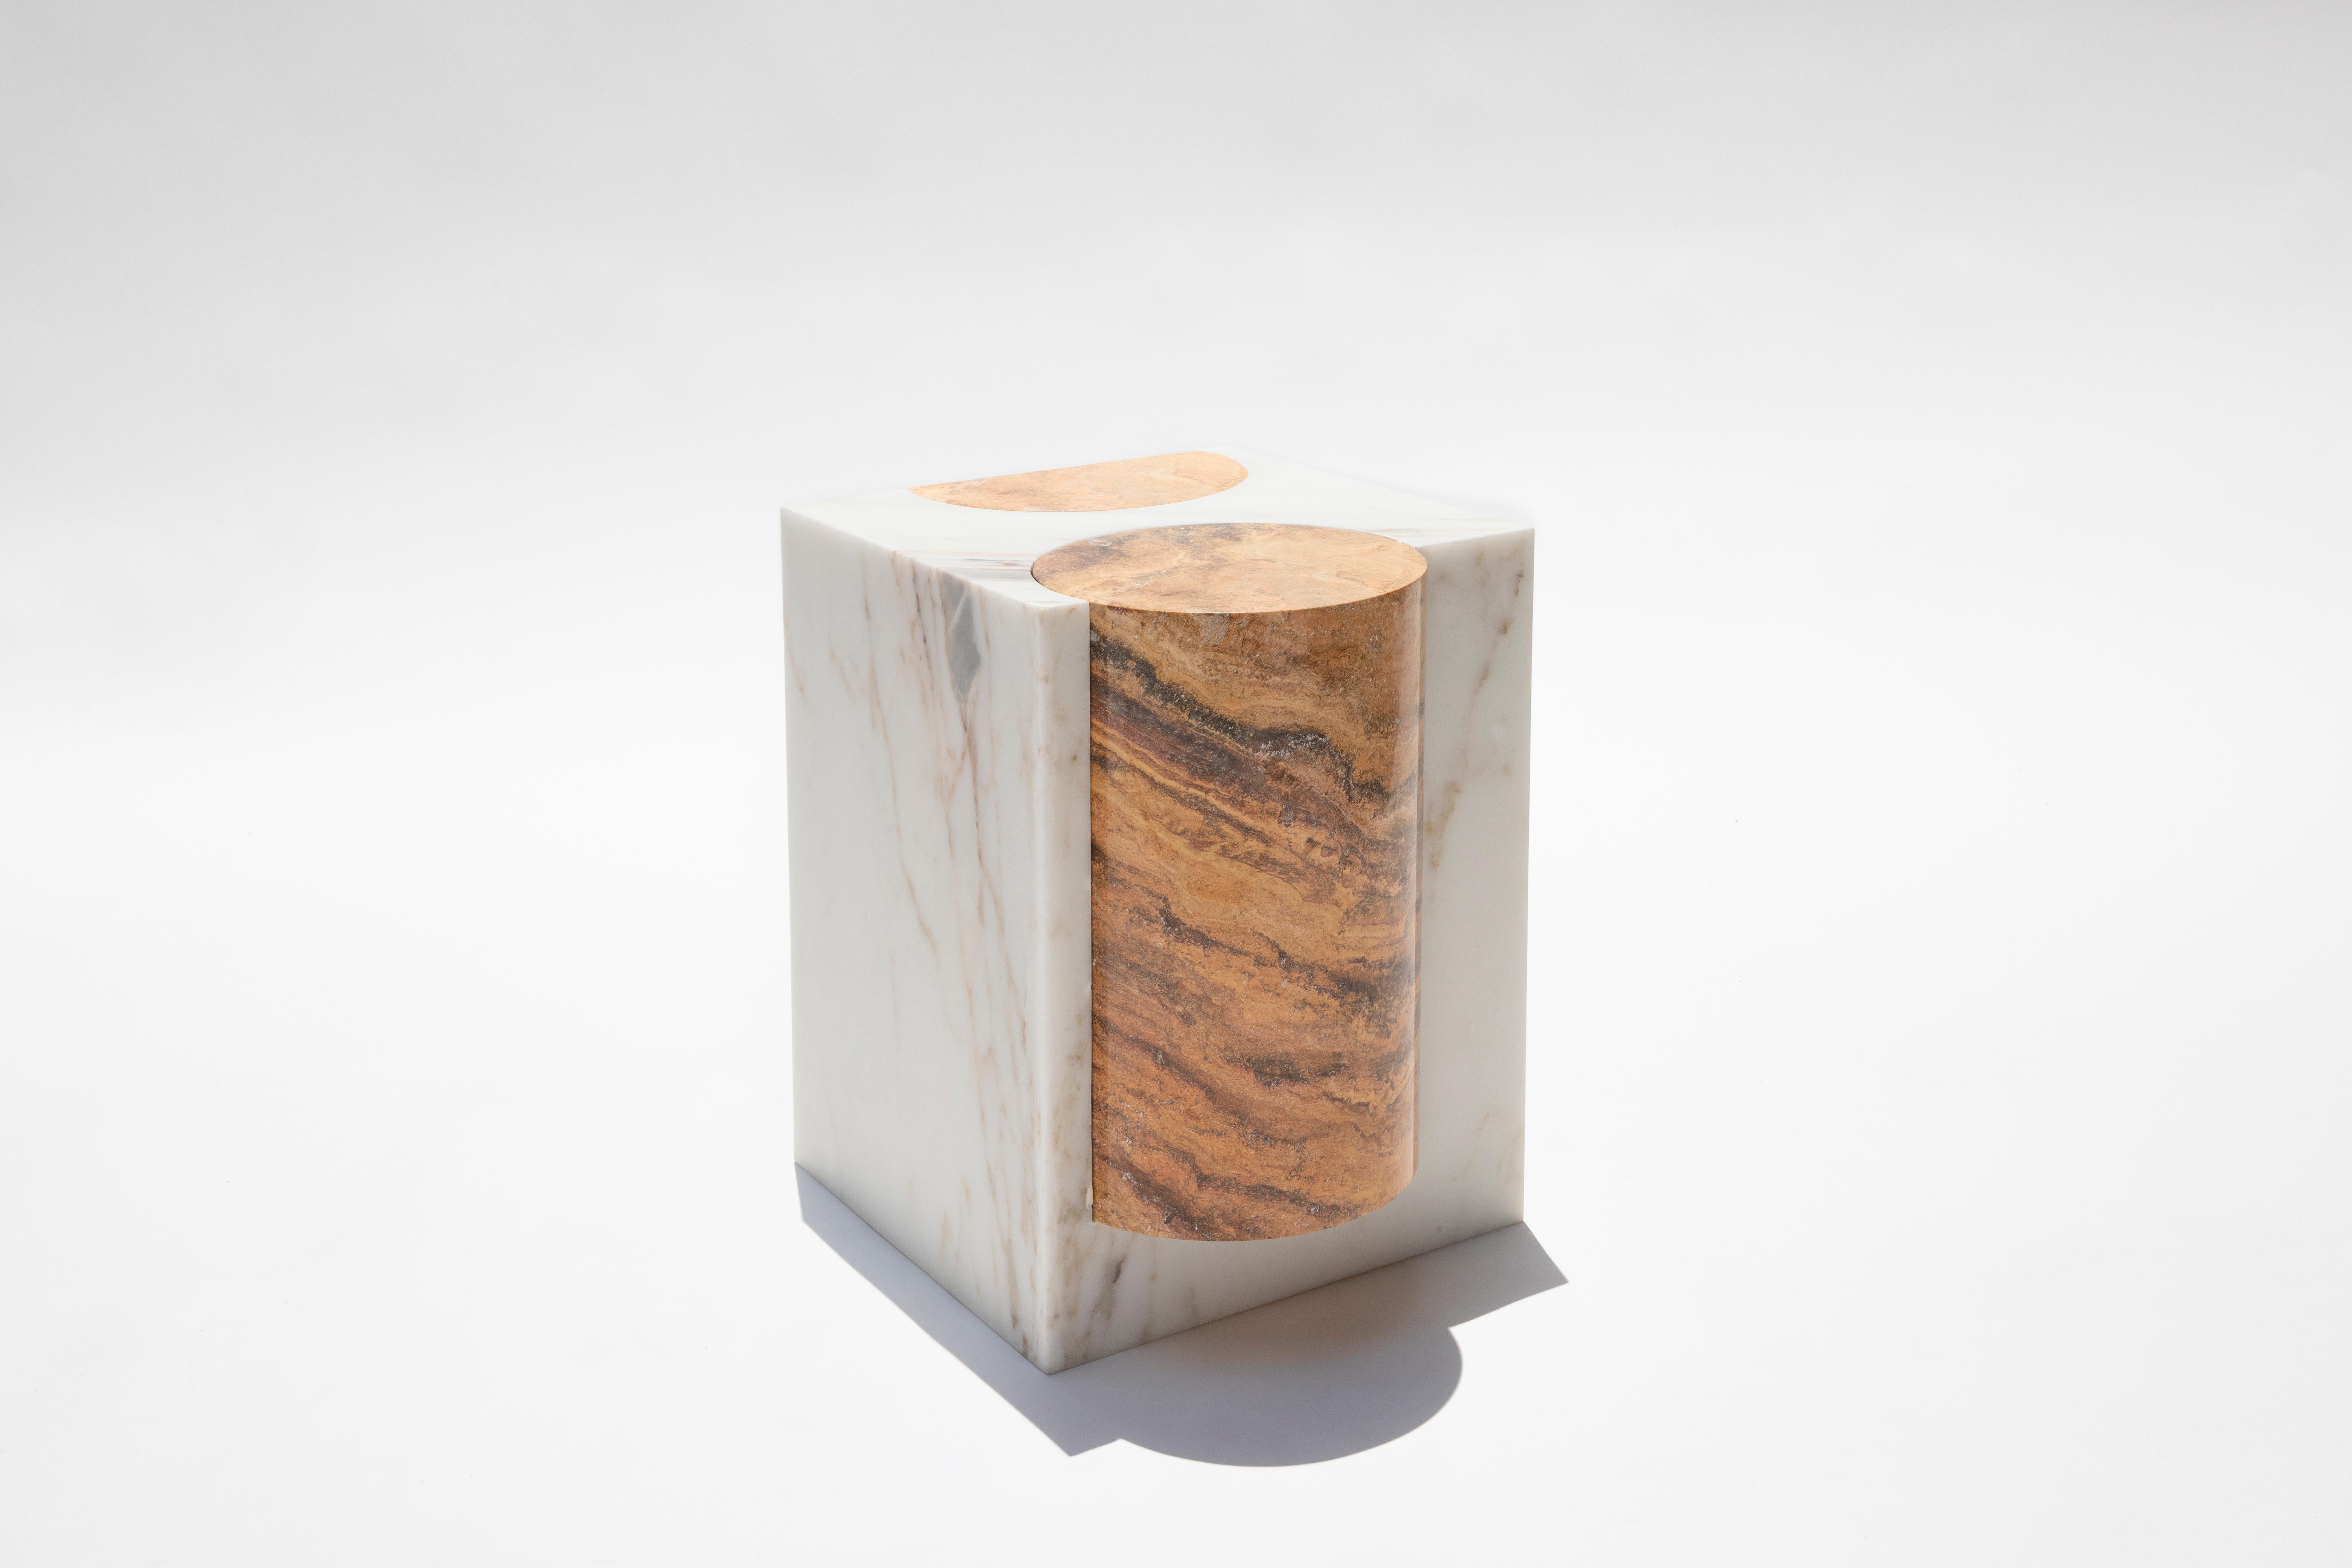 Volcanic Shade of Marble I by Sten Studio

Pineapple onyx marble, natural stone

16 x 12.9 x 16.9 in

Serving as a visual metaphor for volcanoes that, through their craters, open faultlines into the Earth’s core, they are made from square-shaped